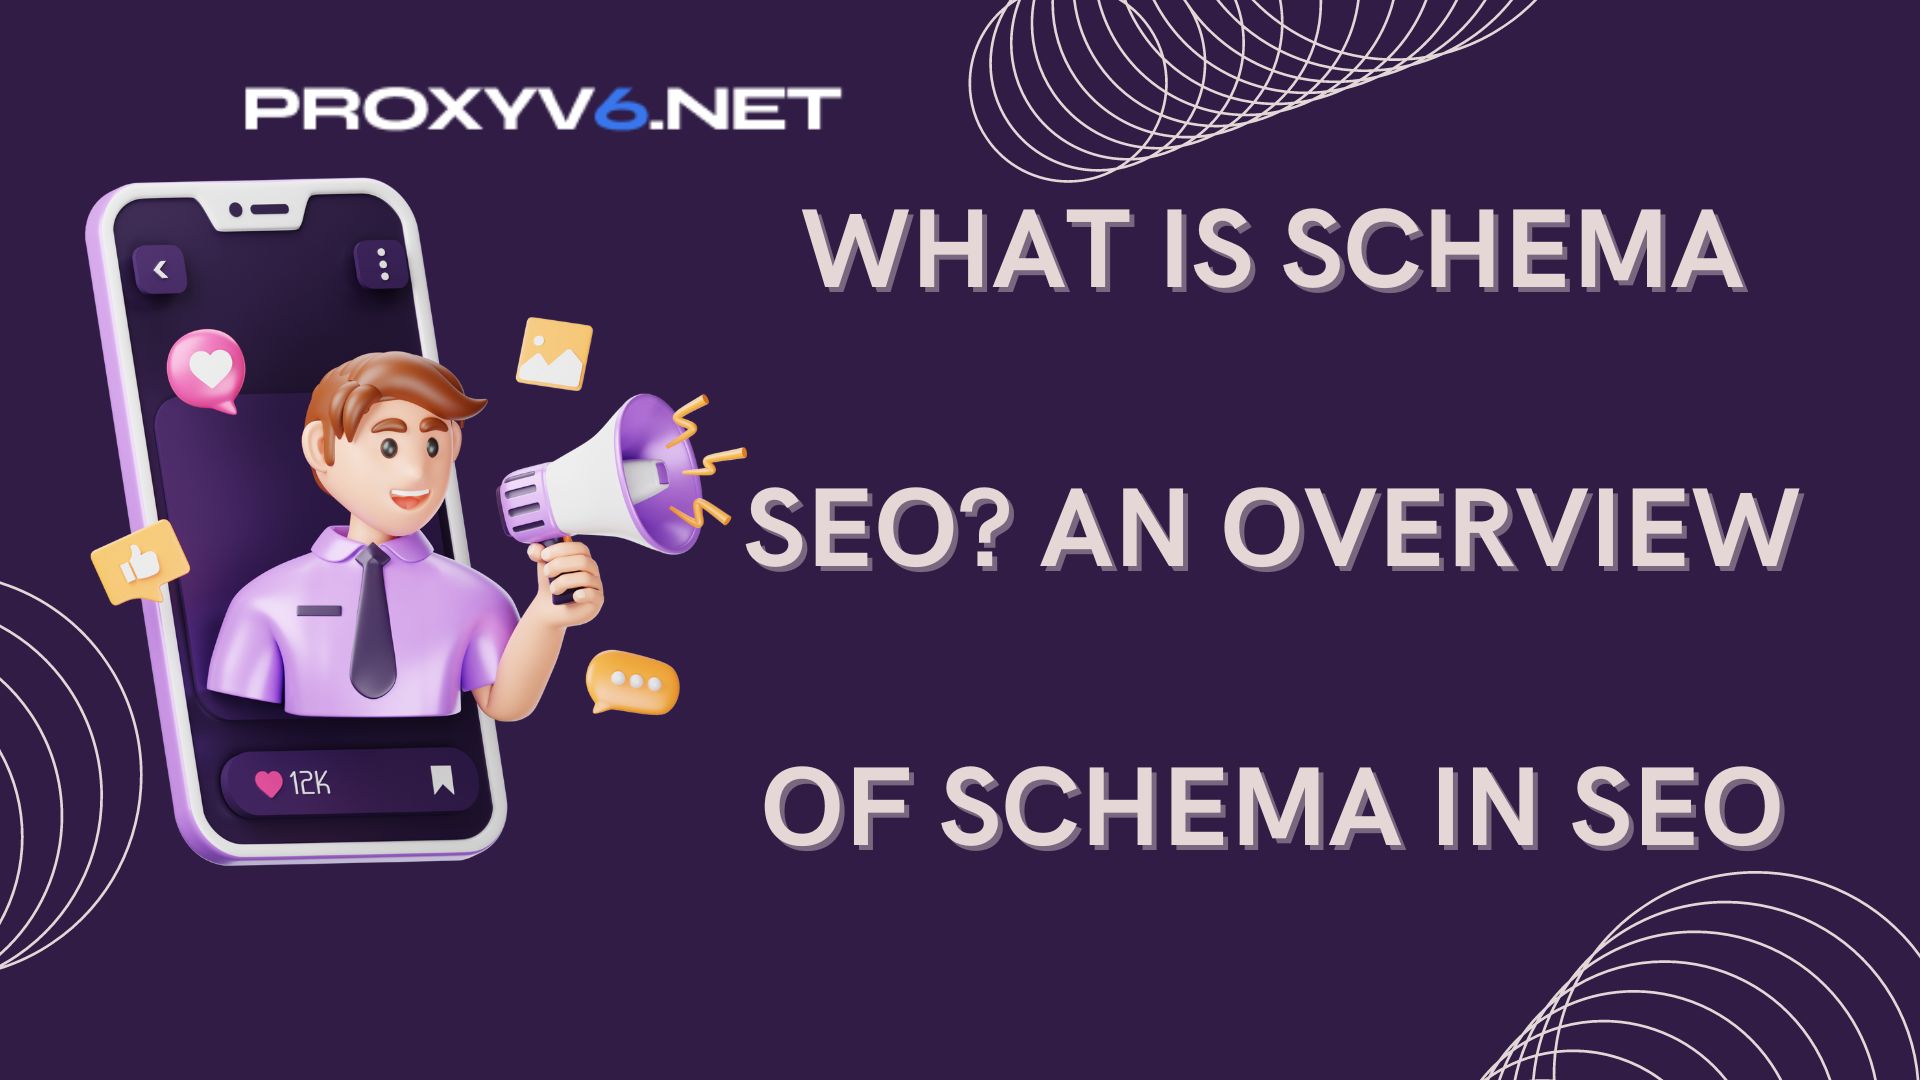 What is Schema SEO? An Overview of SCHEMA in SEO